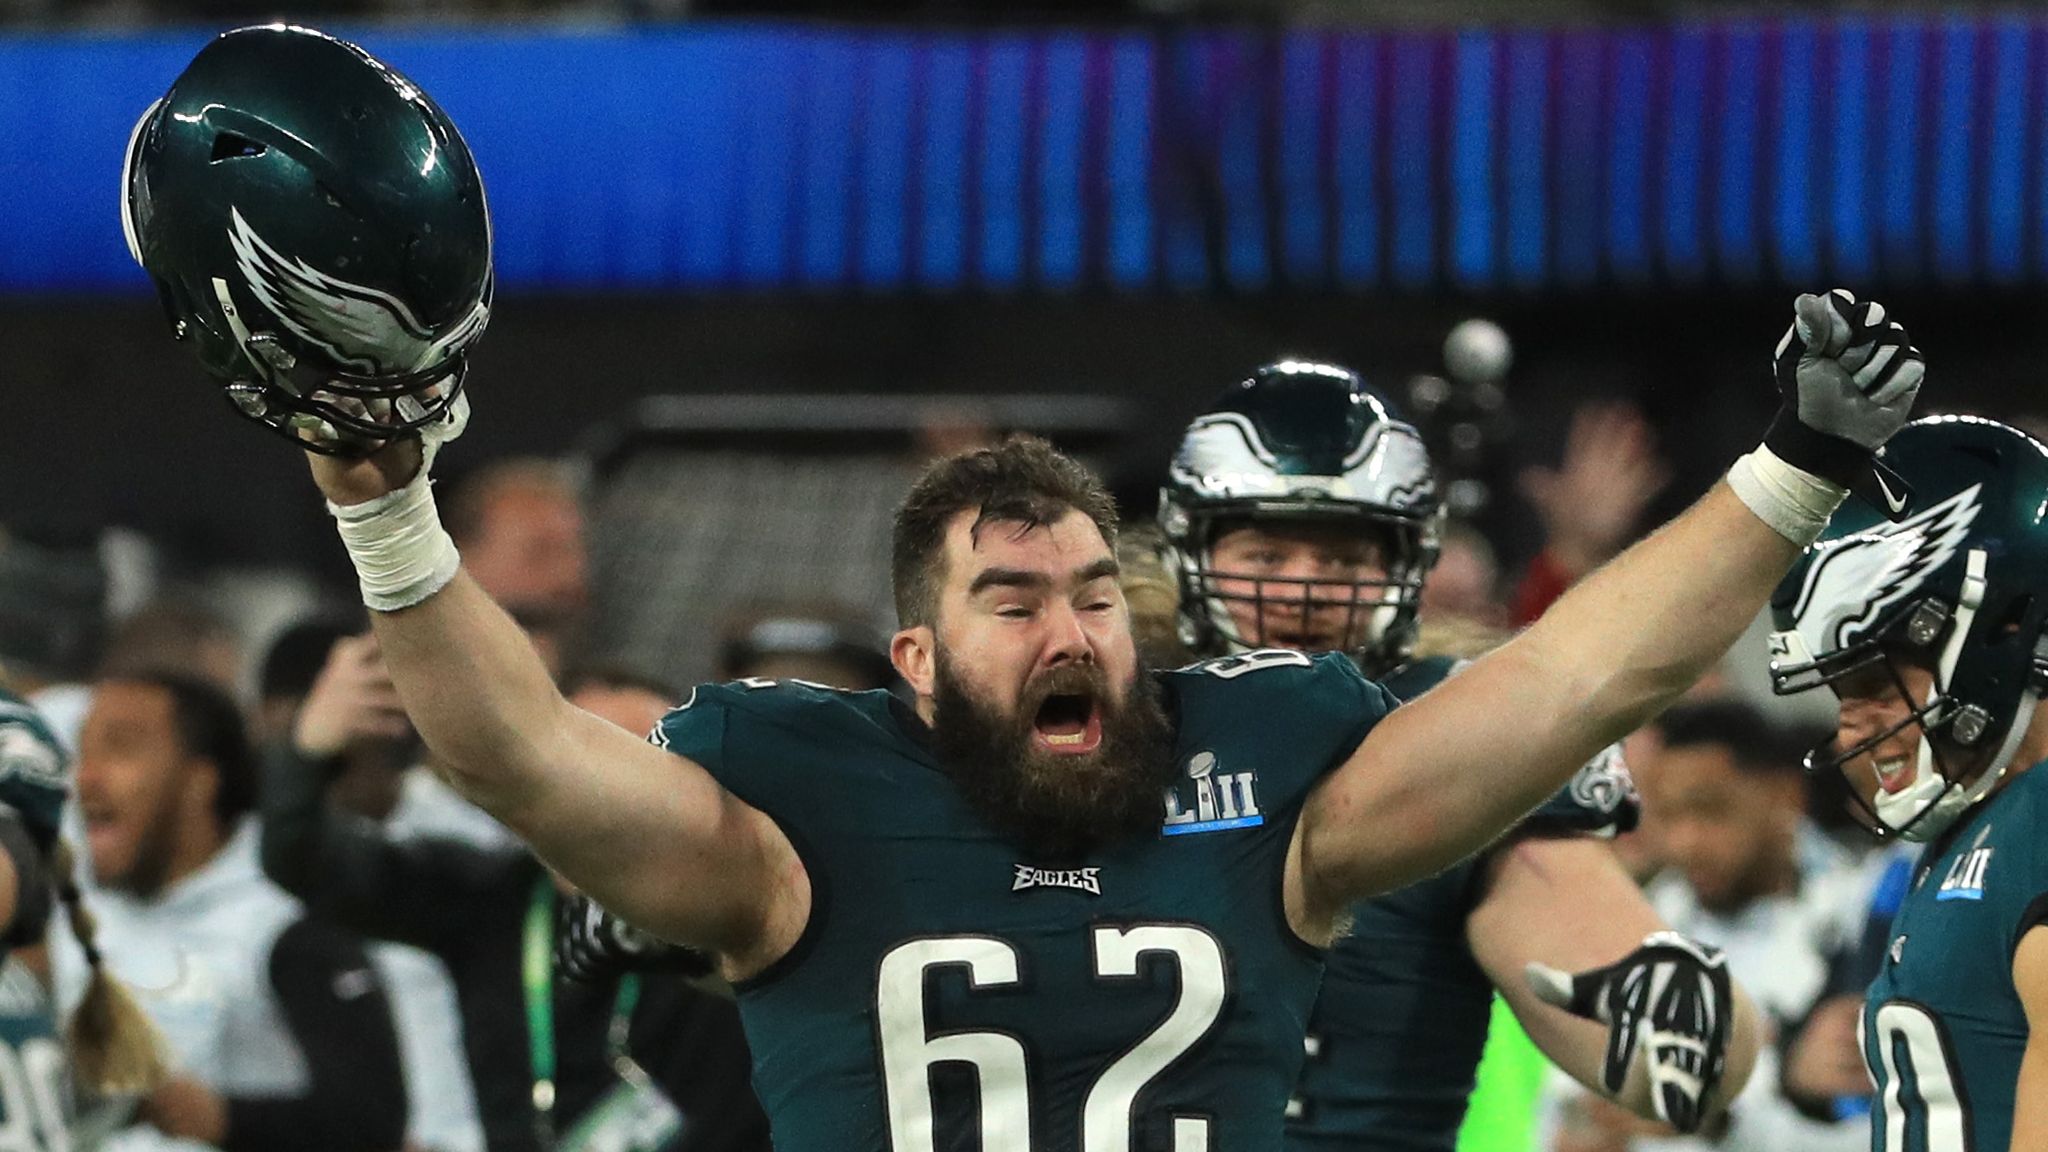 Eagles fans, here's how to handle your Super Bowl hype